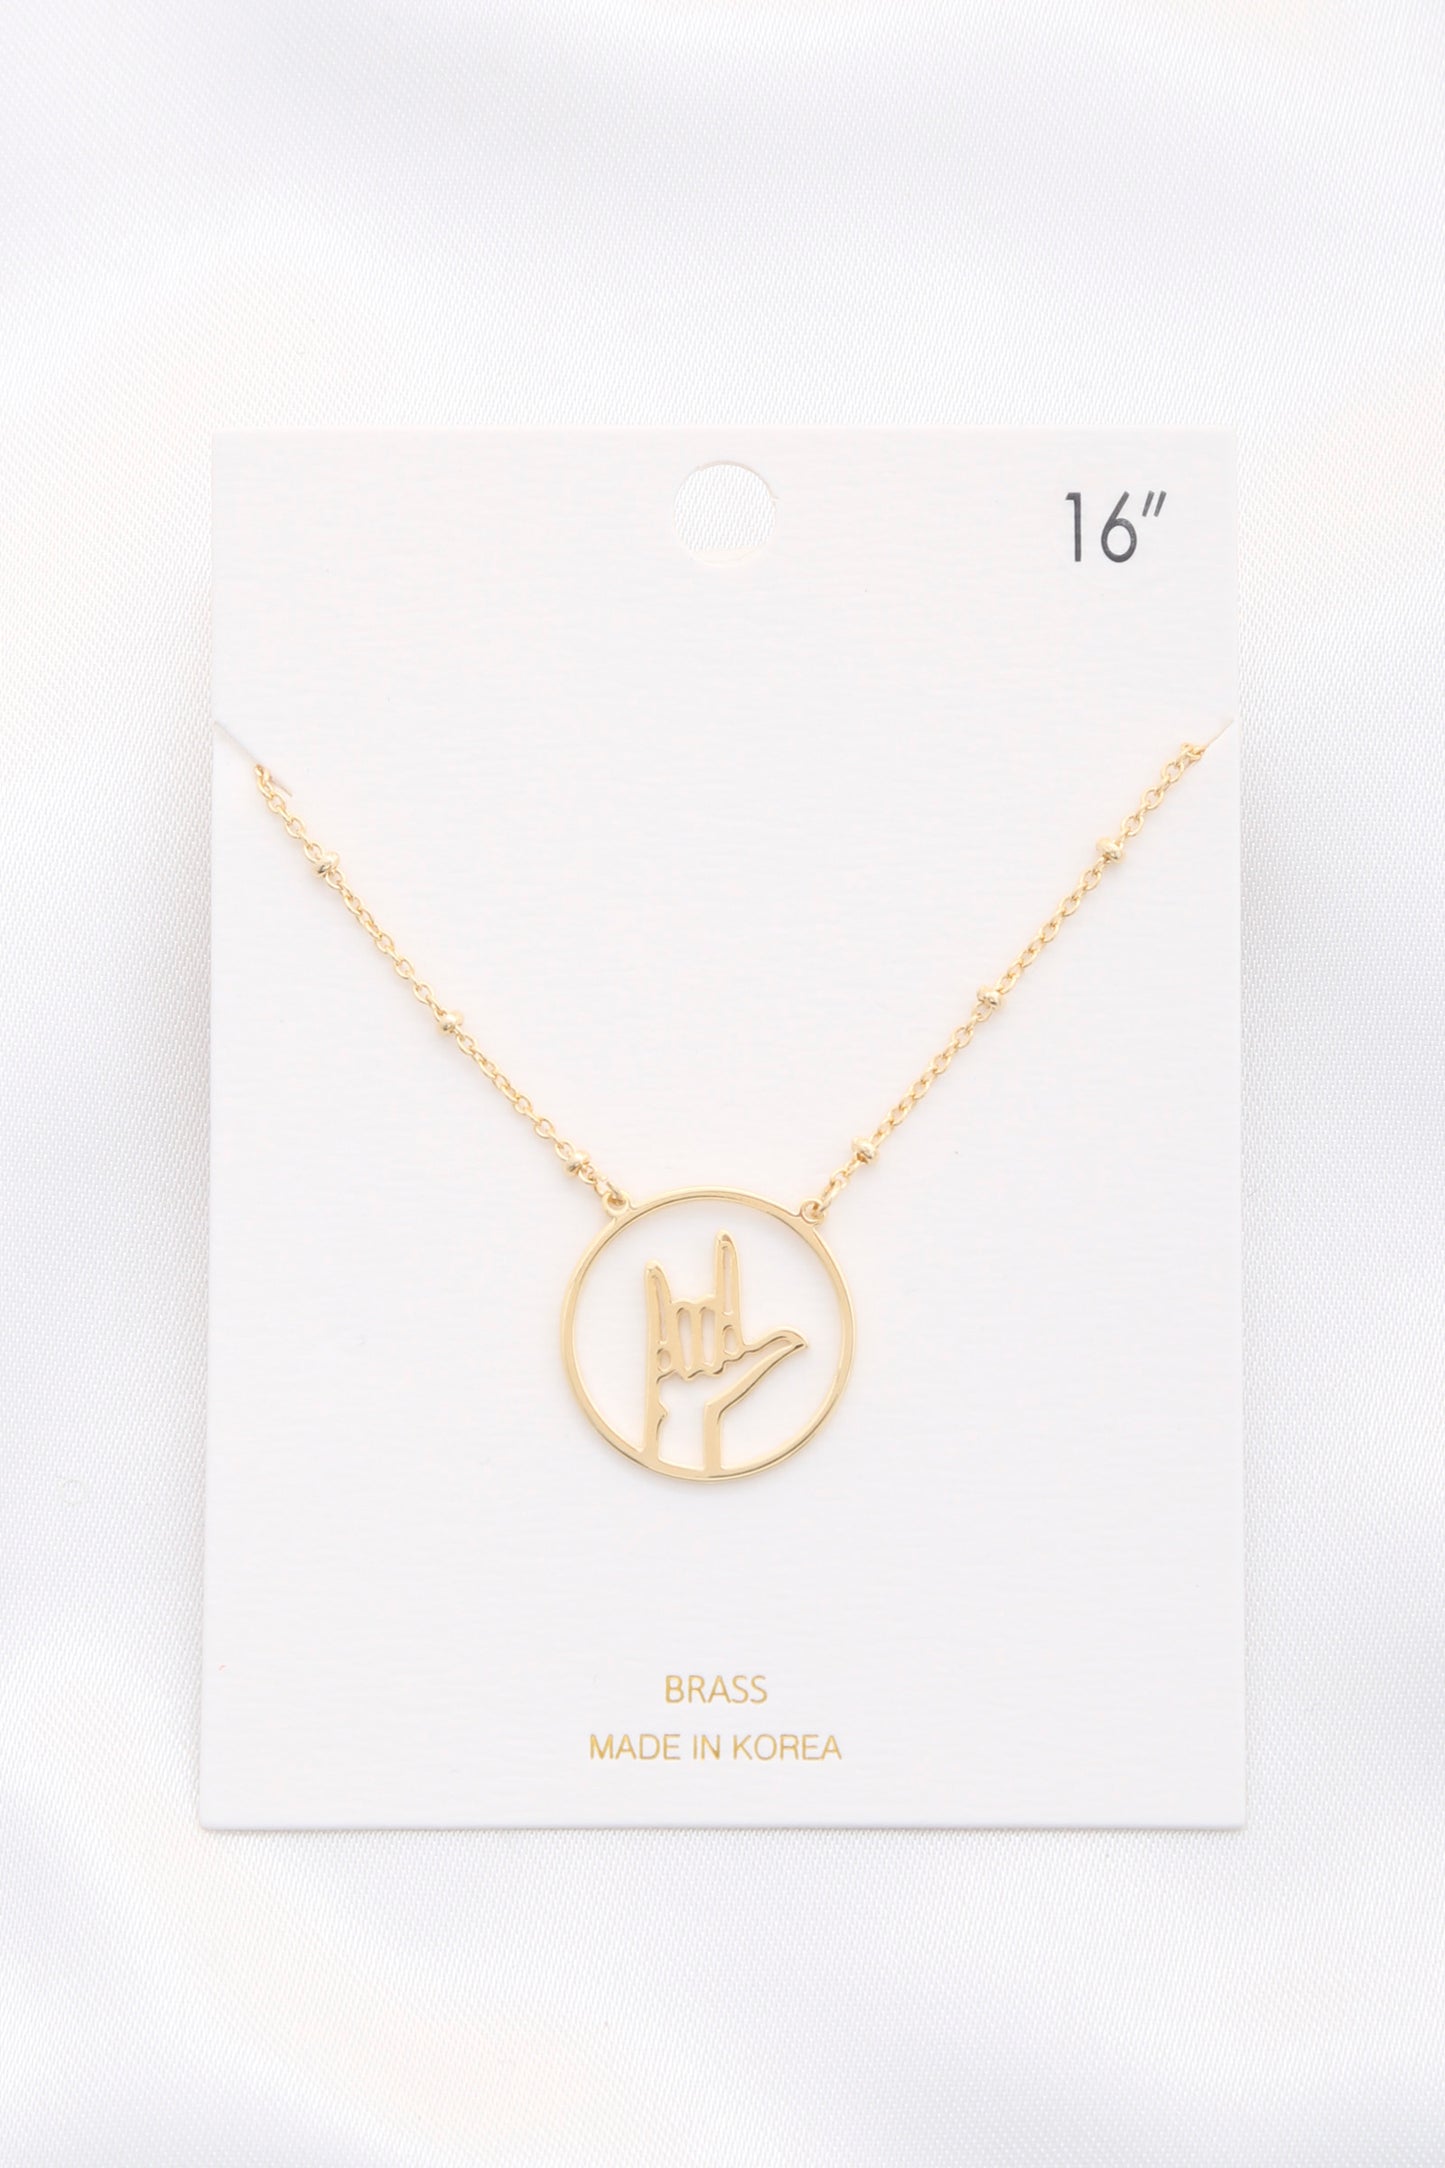 Open Peace Hand Sign Necklace Sunny EvE Fashion